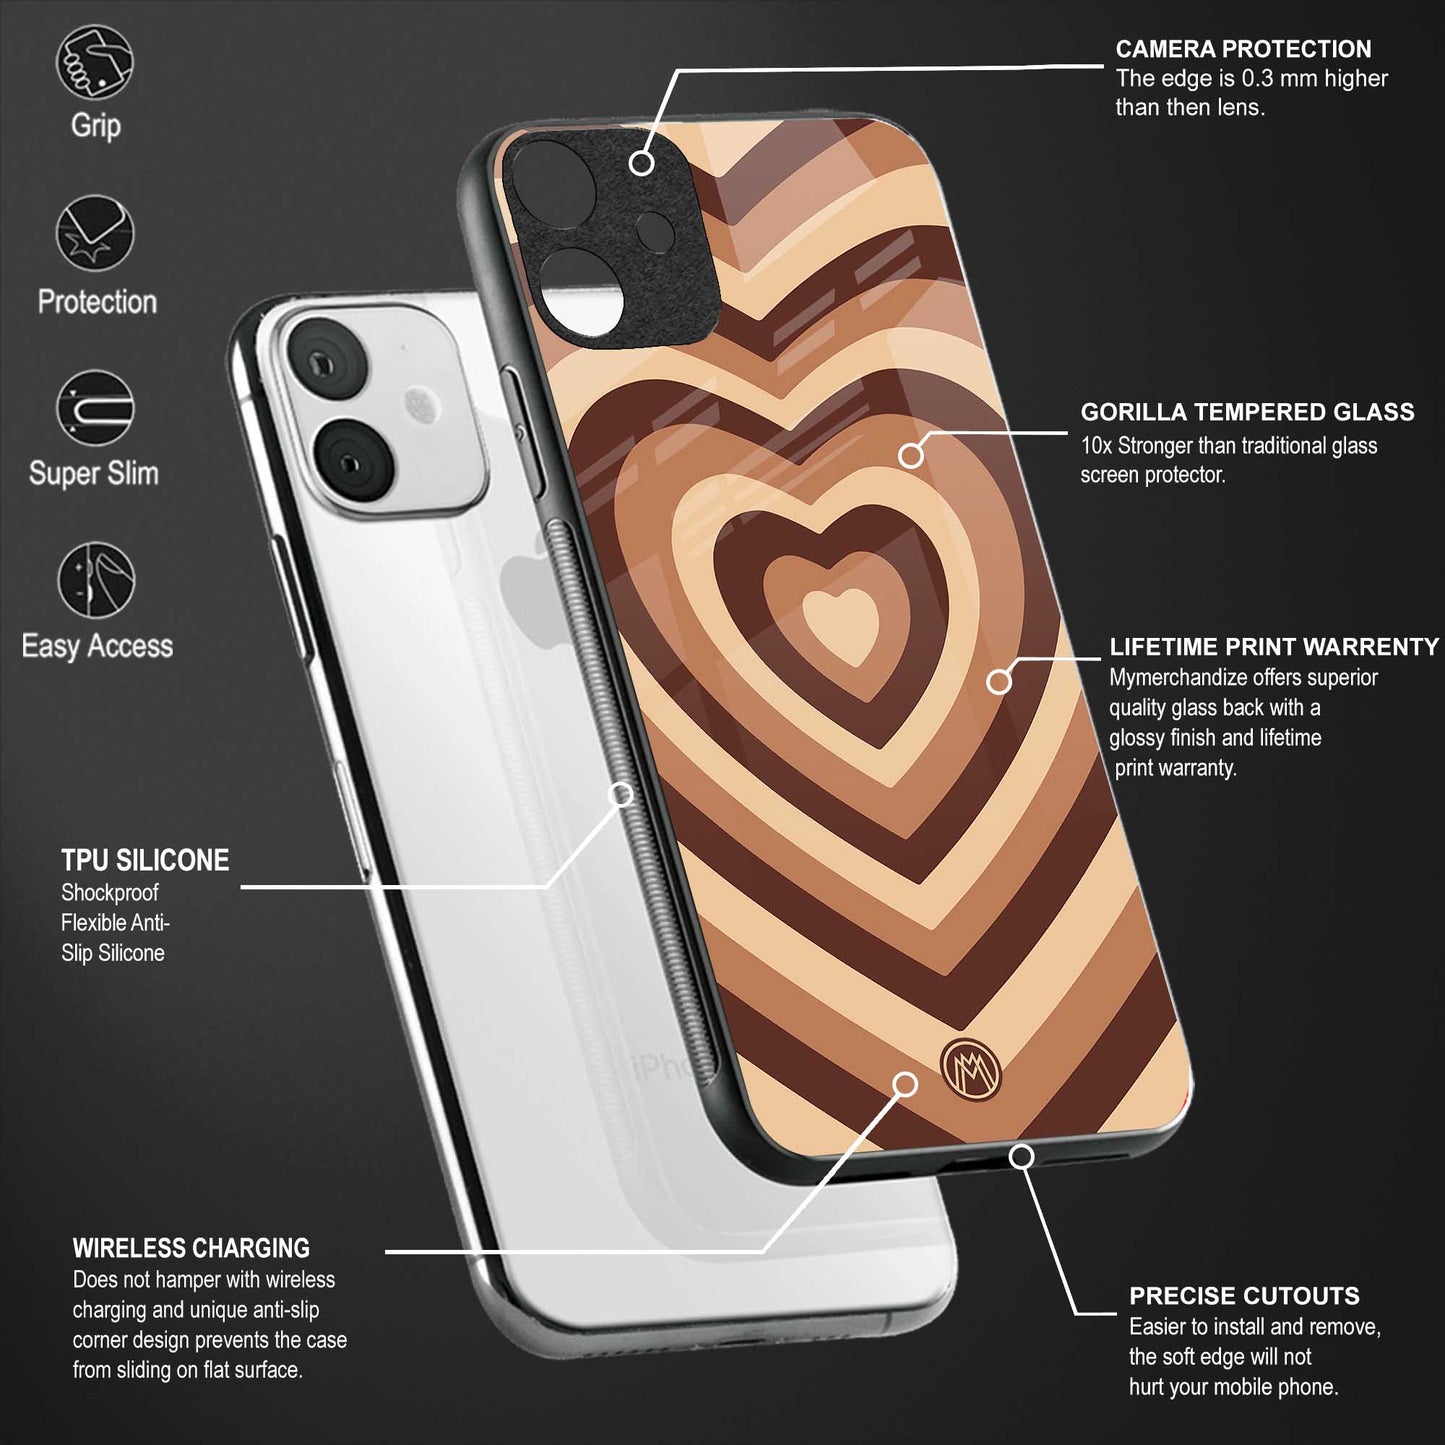 y2k brown hearts aesthetic back phone cover | glass case for oneplus nord ce 2 lite 5g